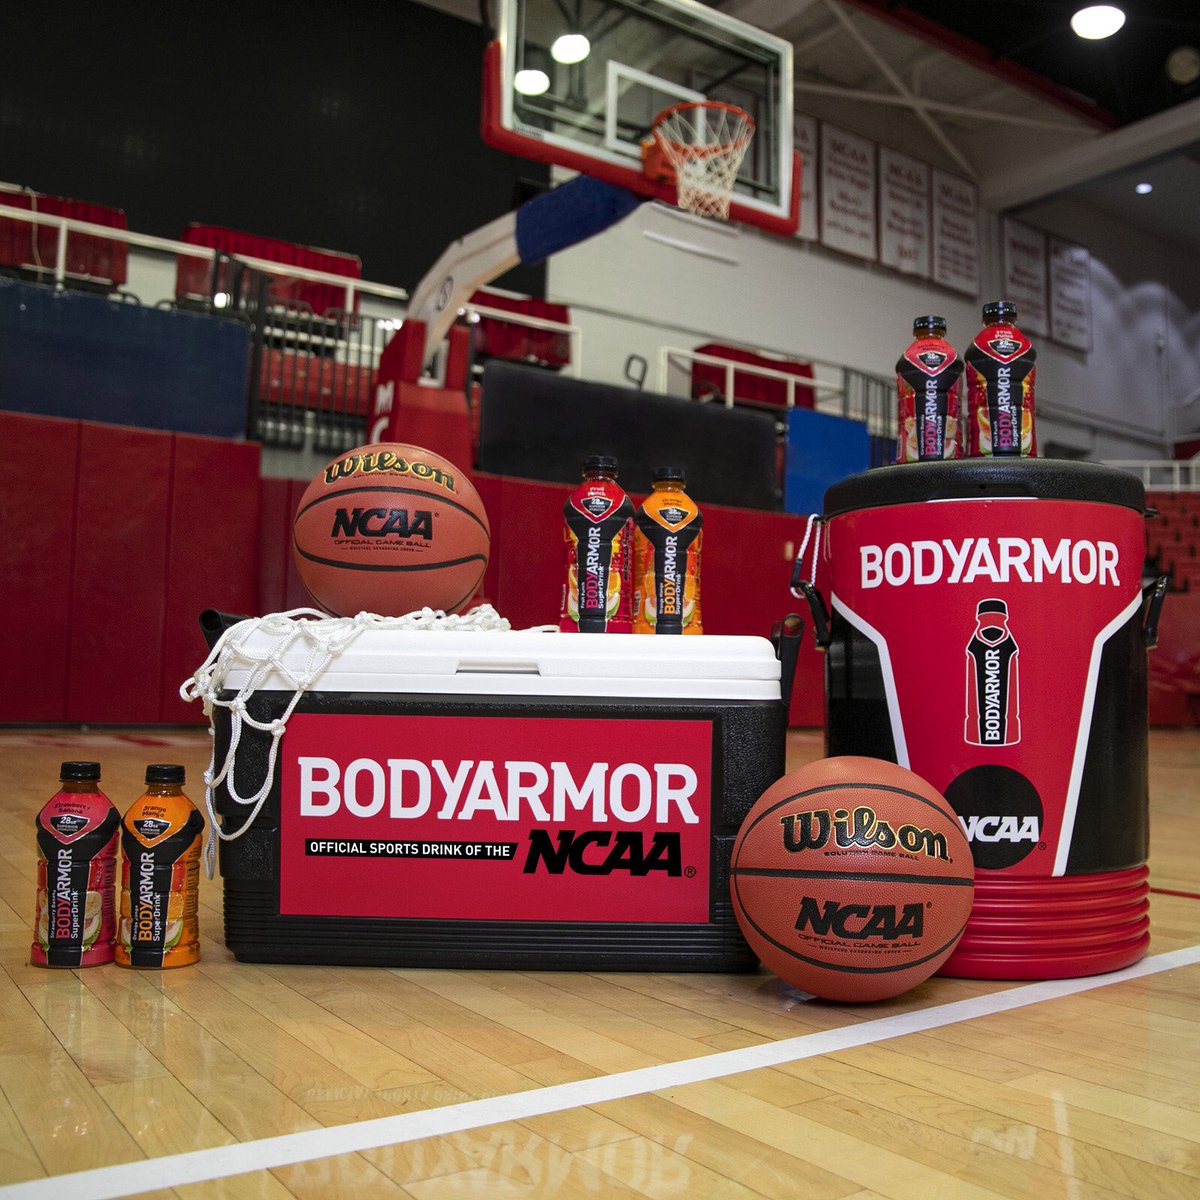 GAME. CHANGER. @DrinkBODYARMOR is now the OFFICIAL sports drink of NCAA & March Madness. We’re just getting started 🏀🏆👊🏾 #ObsessedWithBetter #MambaMentality